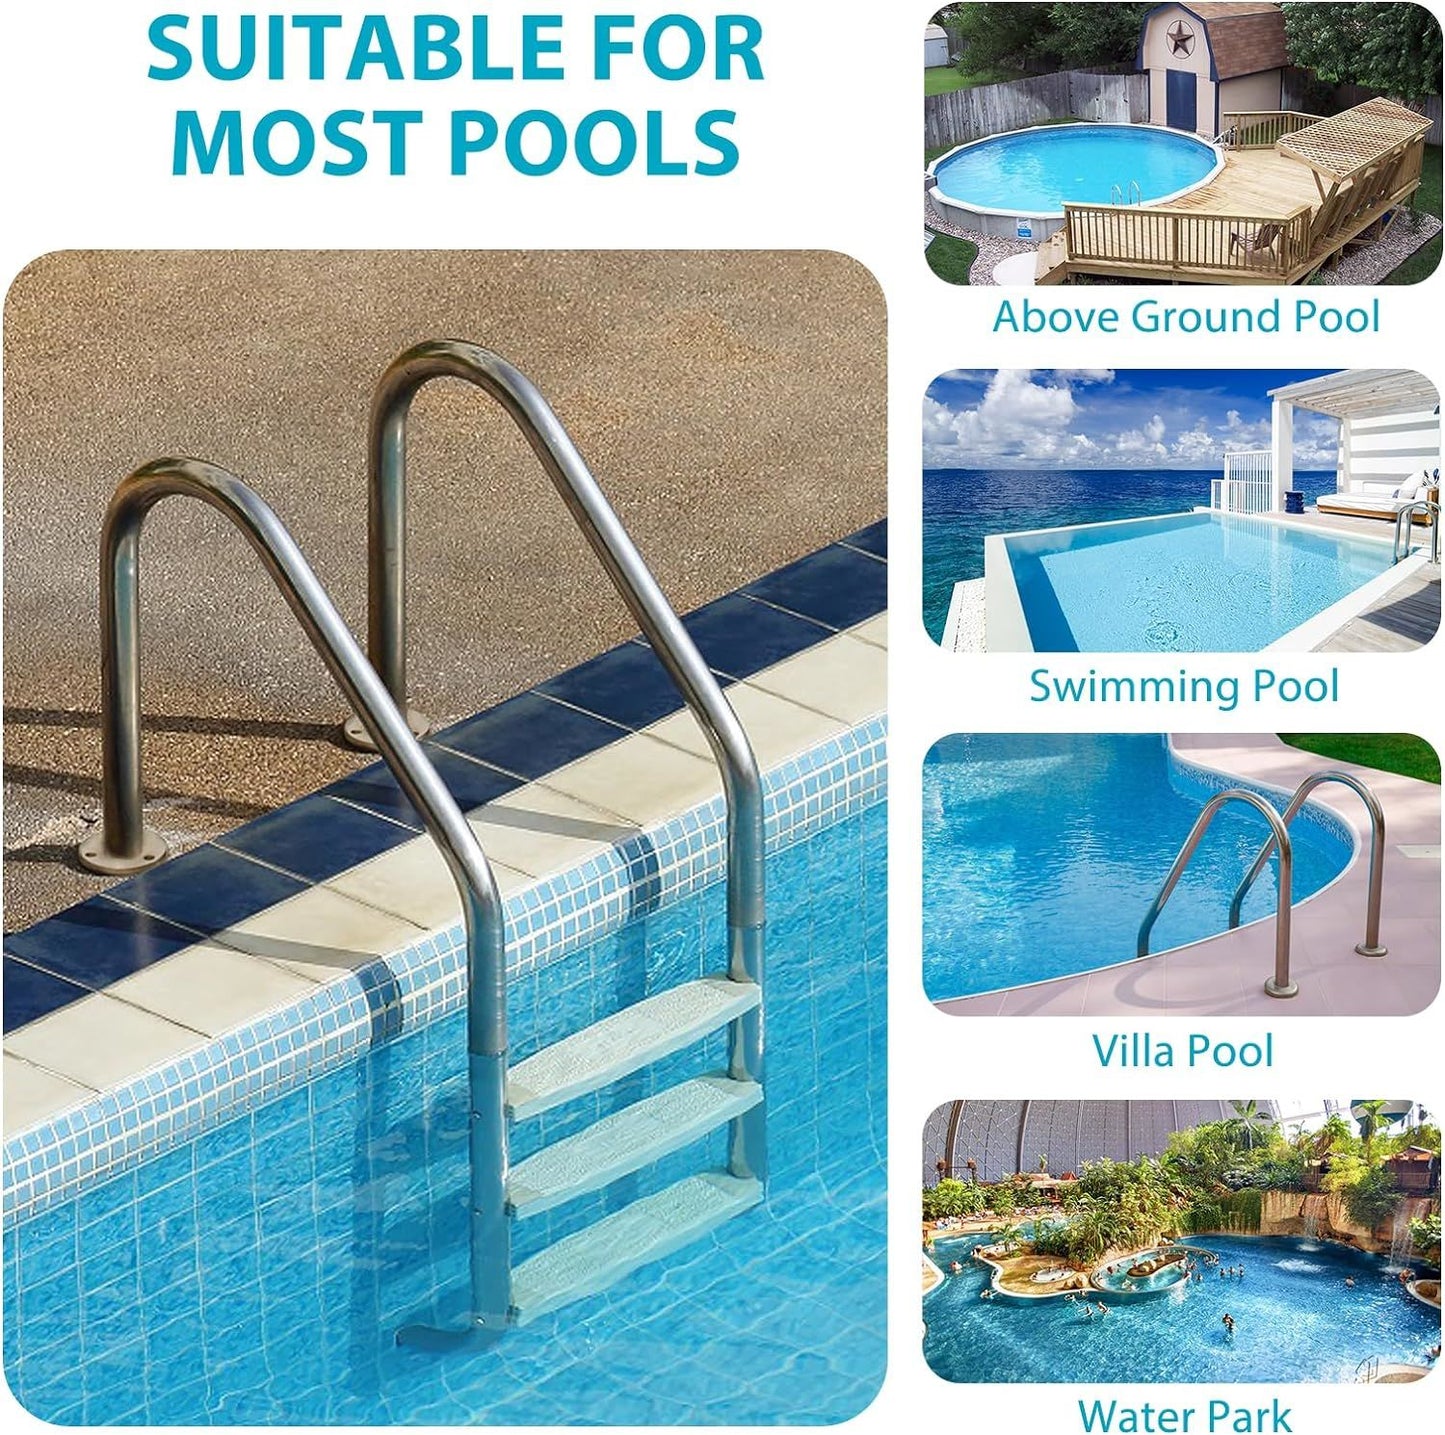 Swimming Pool Ladder, Stainless Steel Pool Steps for Inground Pools, 3 Step Non-Slip Treads Pool Stairs with Ergonomic Pool Handrails, Easy Assembly and Climbing